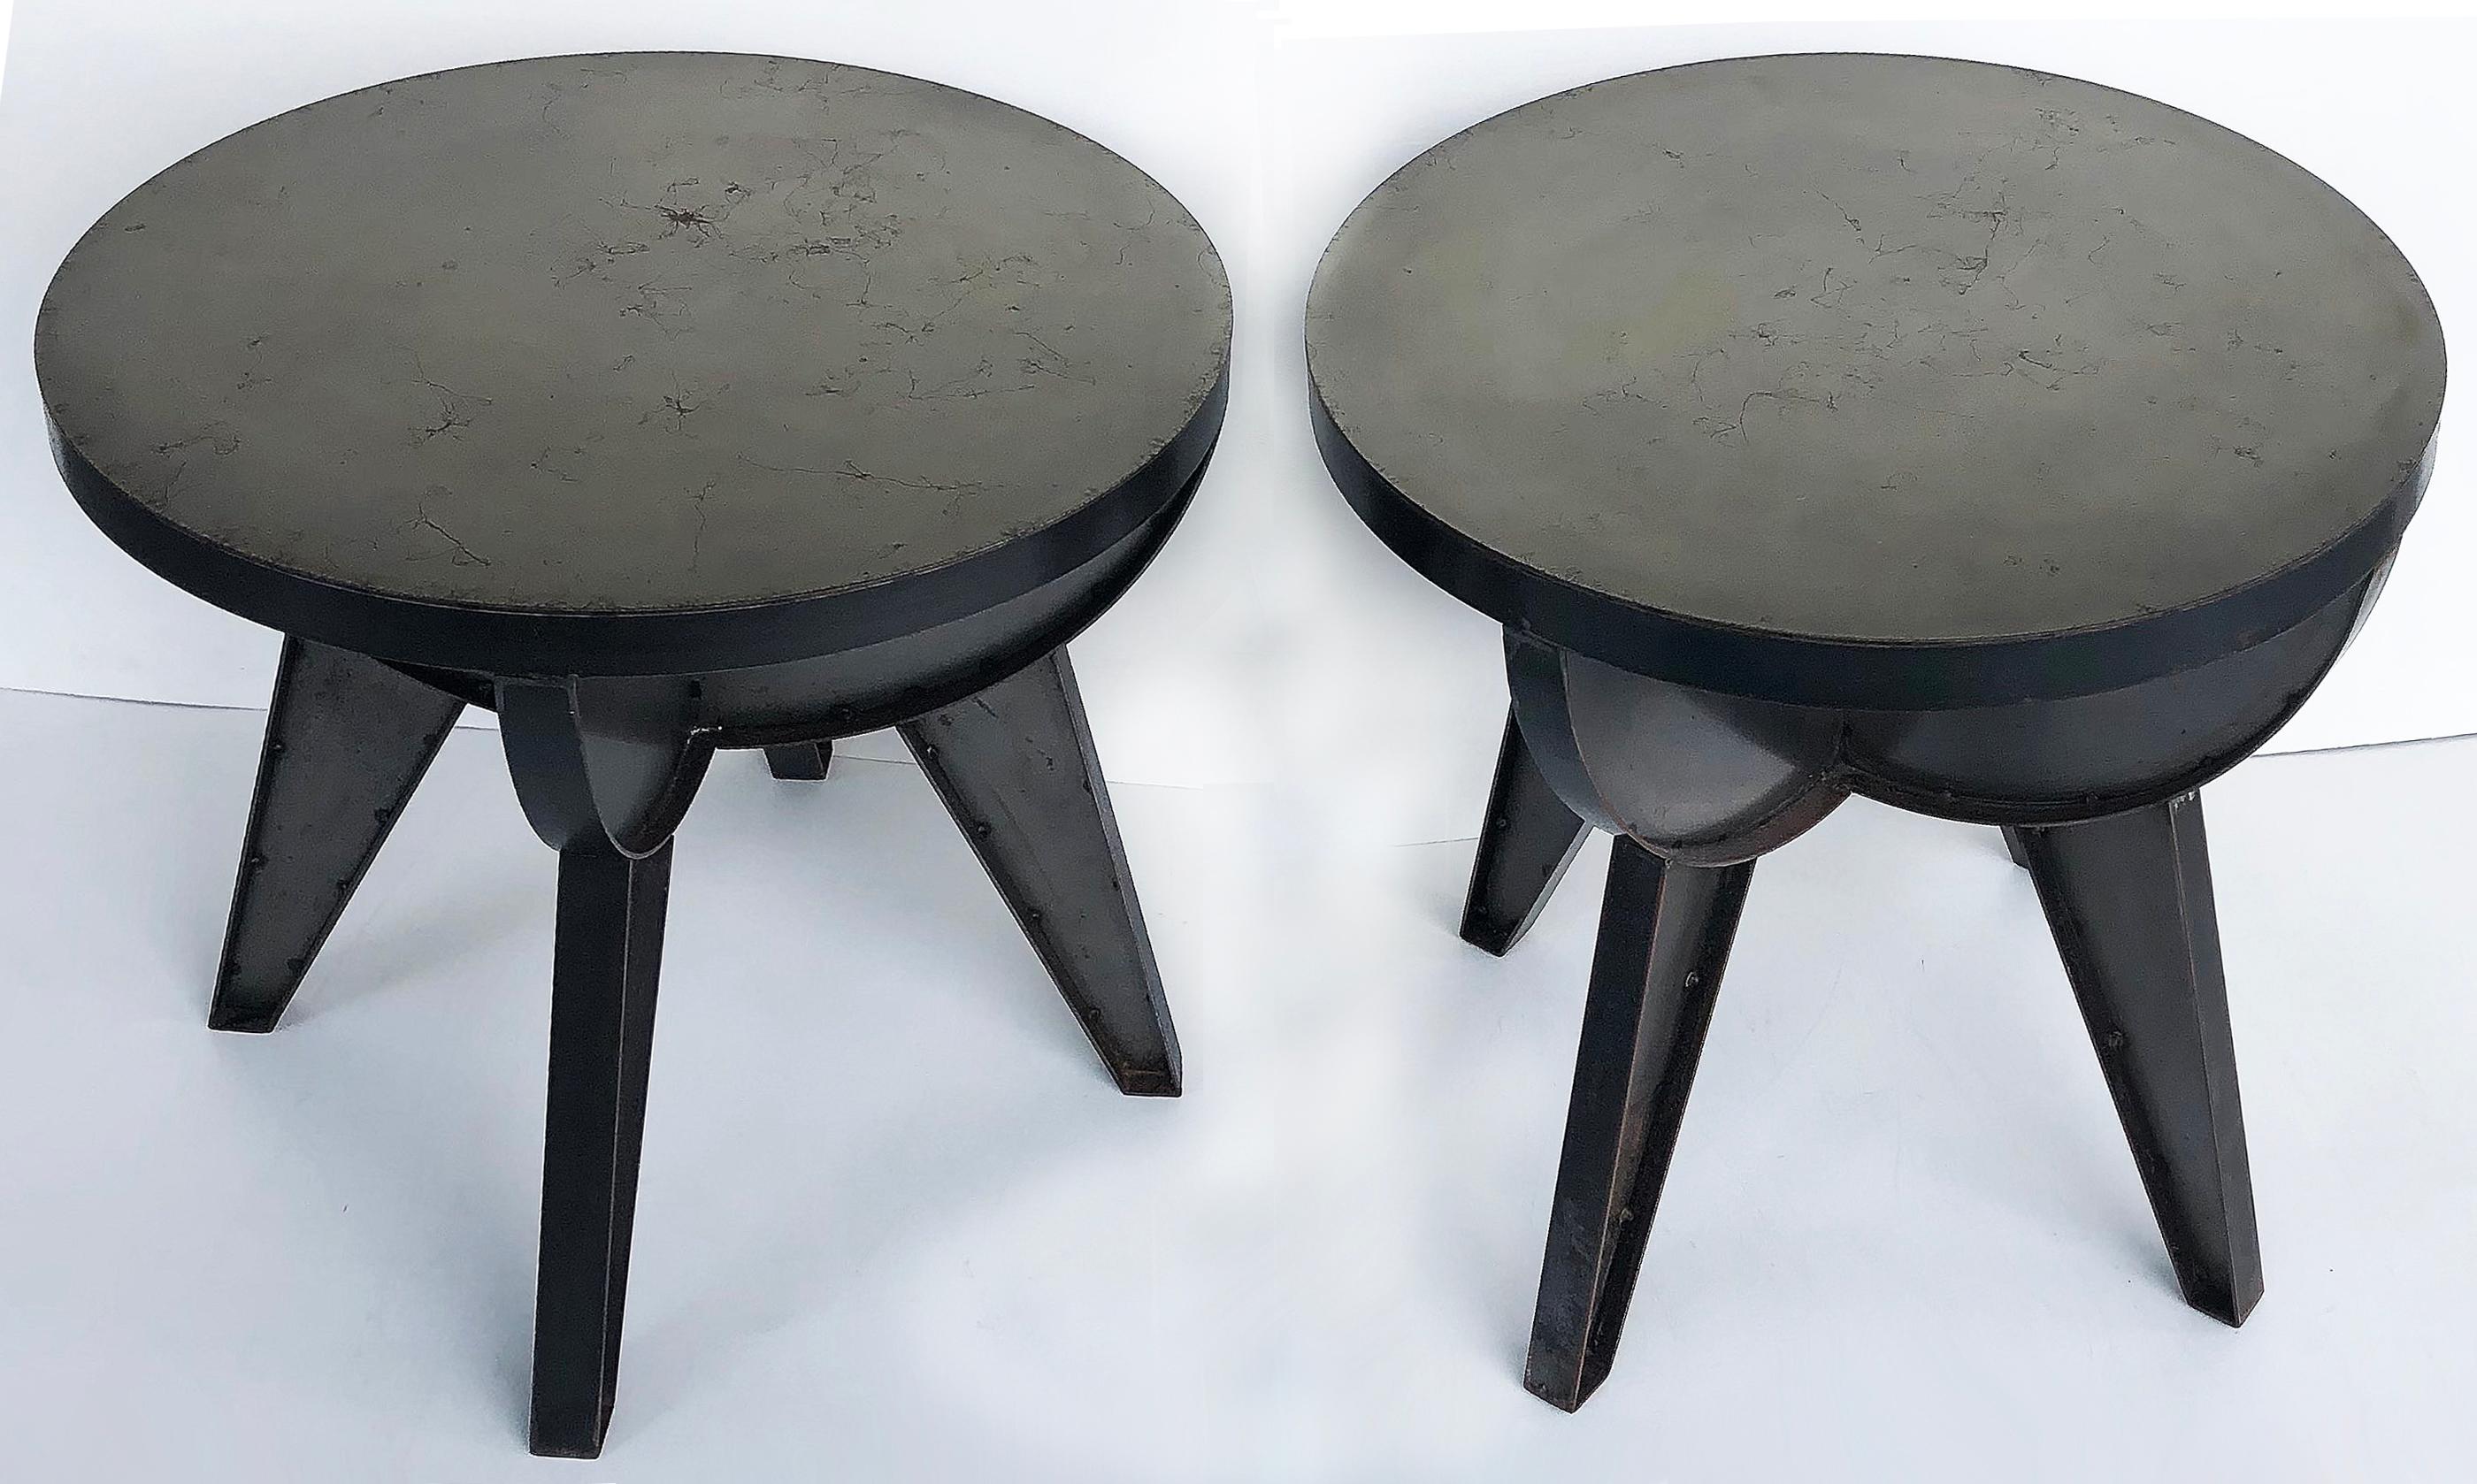 Sputnik Studio Industrial recycled steel side tables by Kevin Shahan

Offered for sale is a pair of sputnik studio side tables created by Kevin Shahan of Swanky Studio using re-purposed metal. These modern industrial tables have a great look with